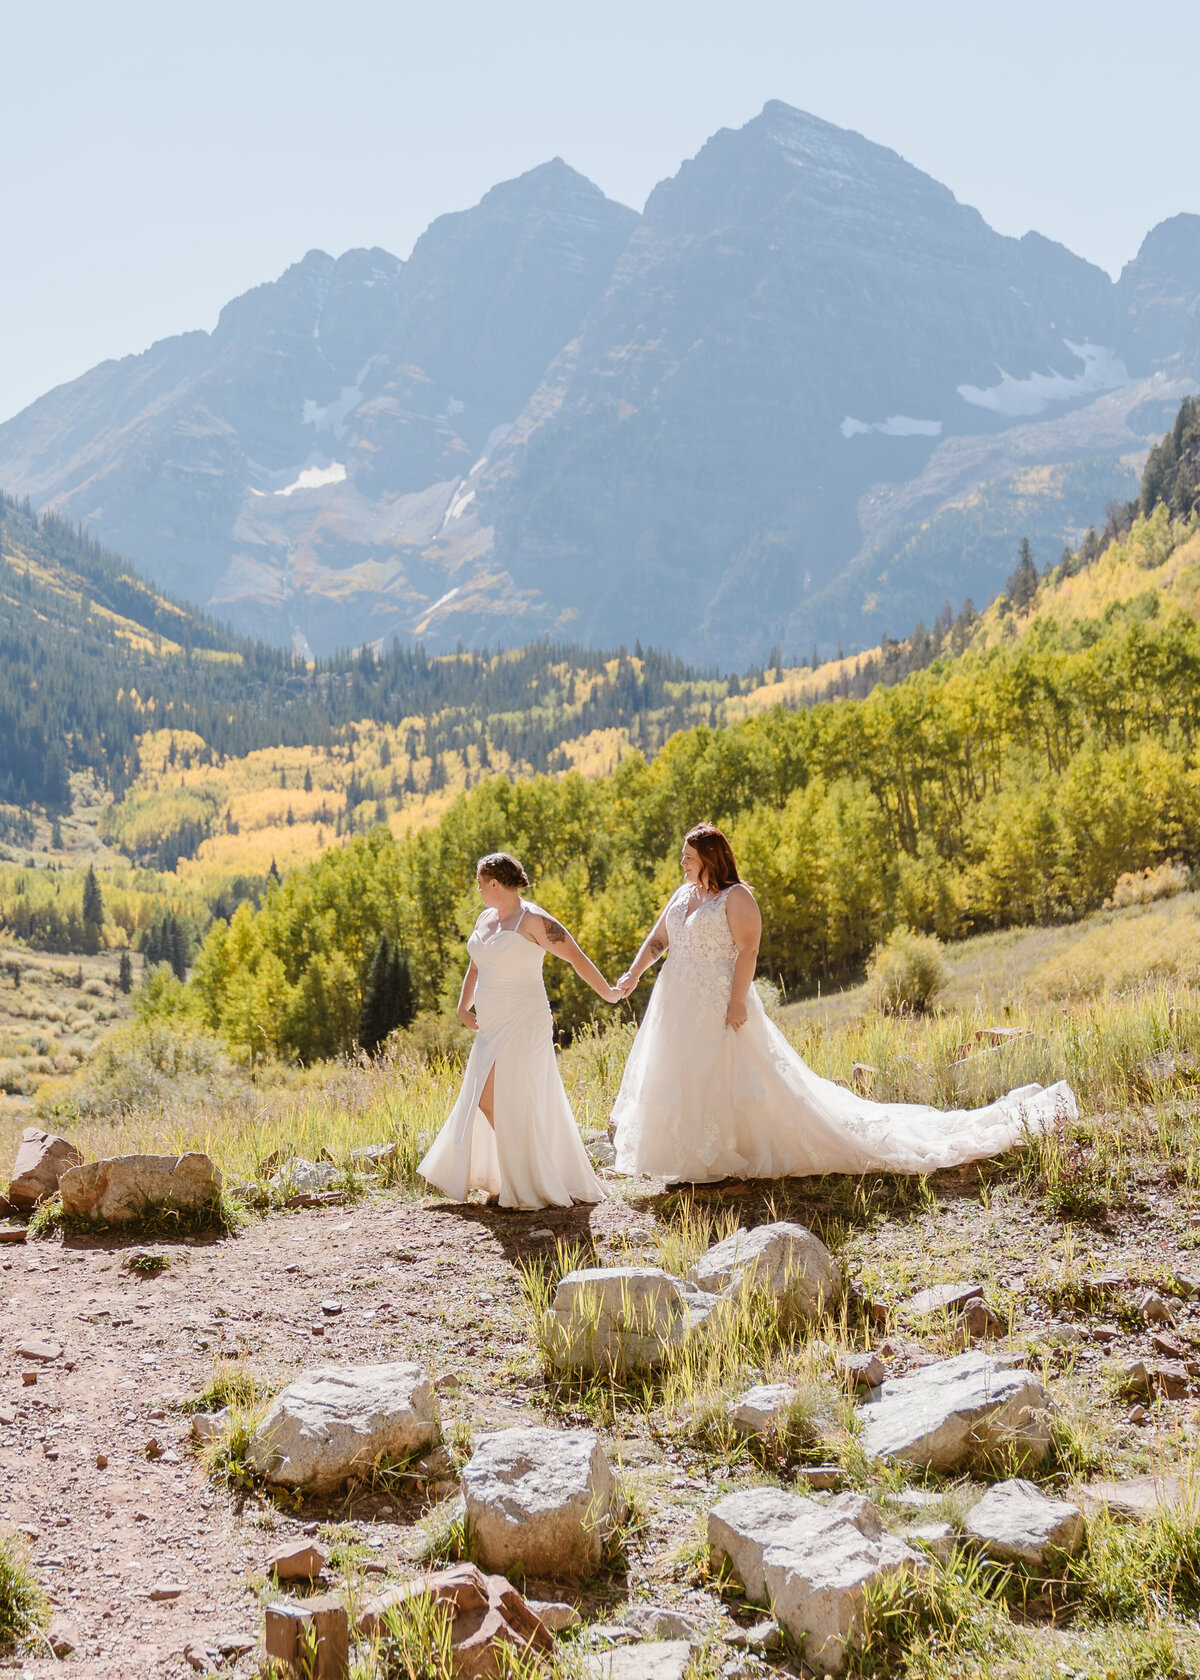 LGBTQ+ Couple Eloping at the  Maroon Bells Amphitheater in Aspen, Colorado